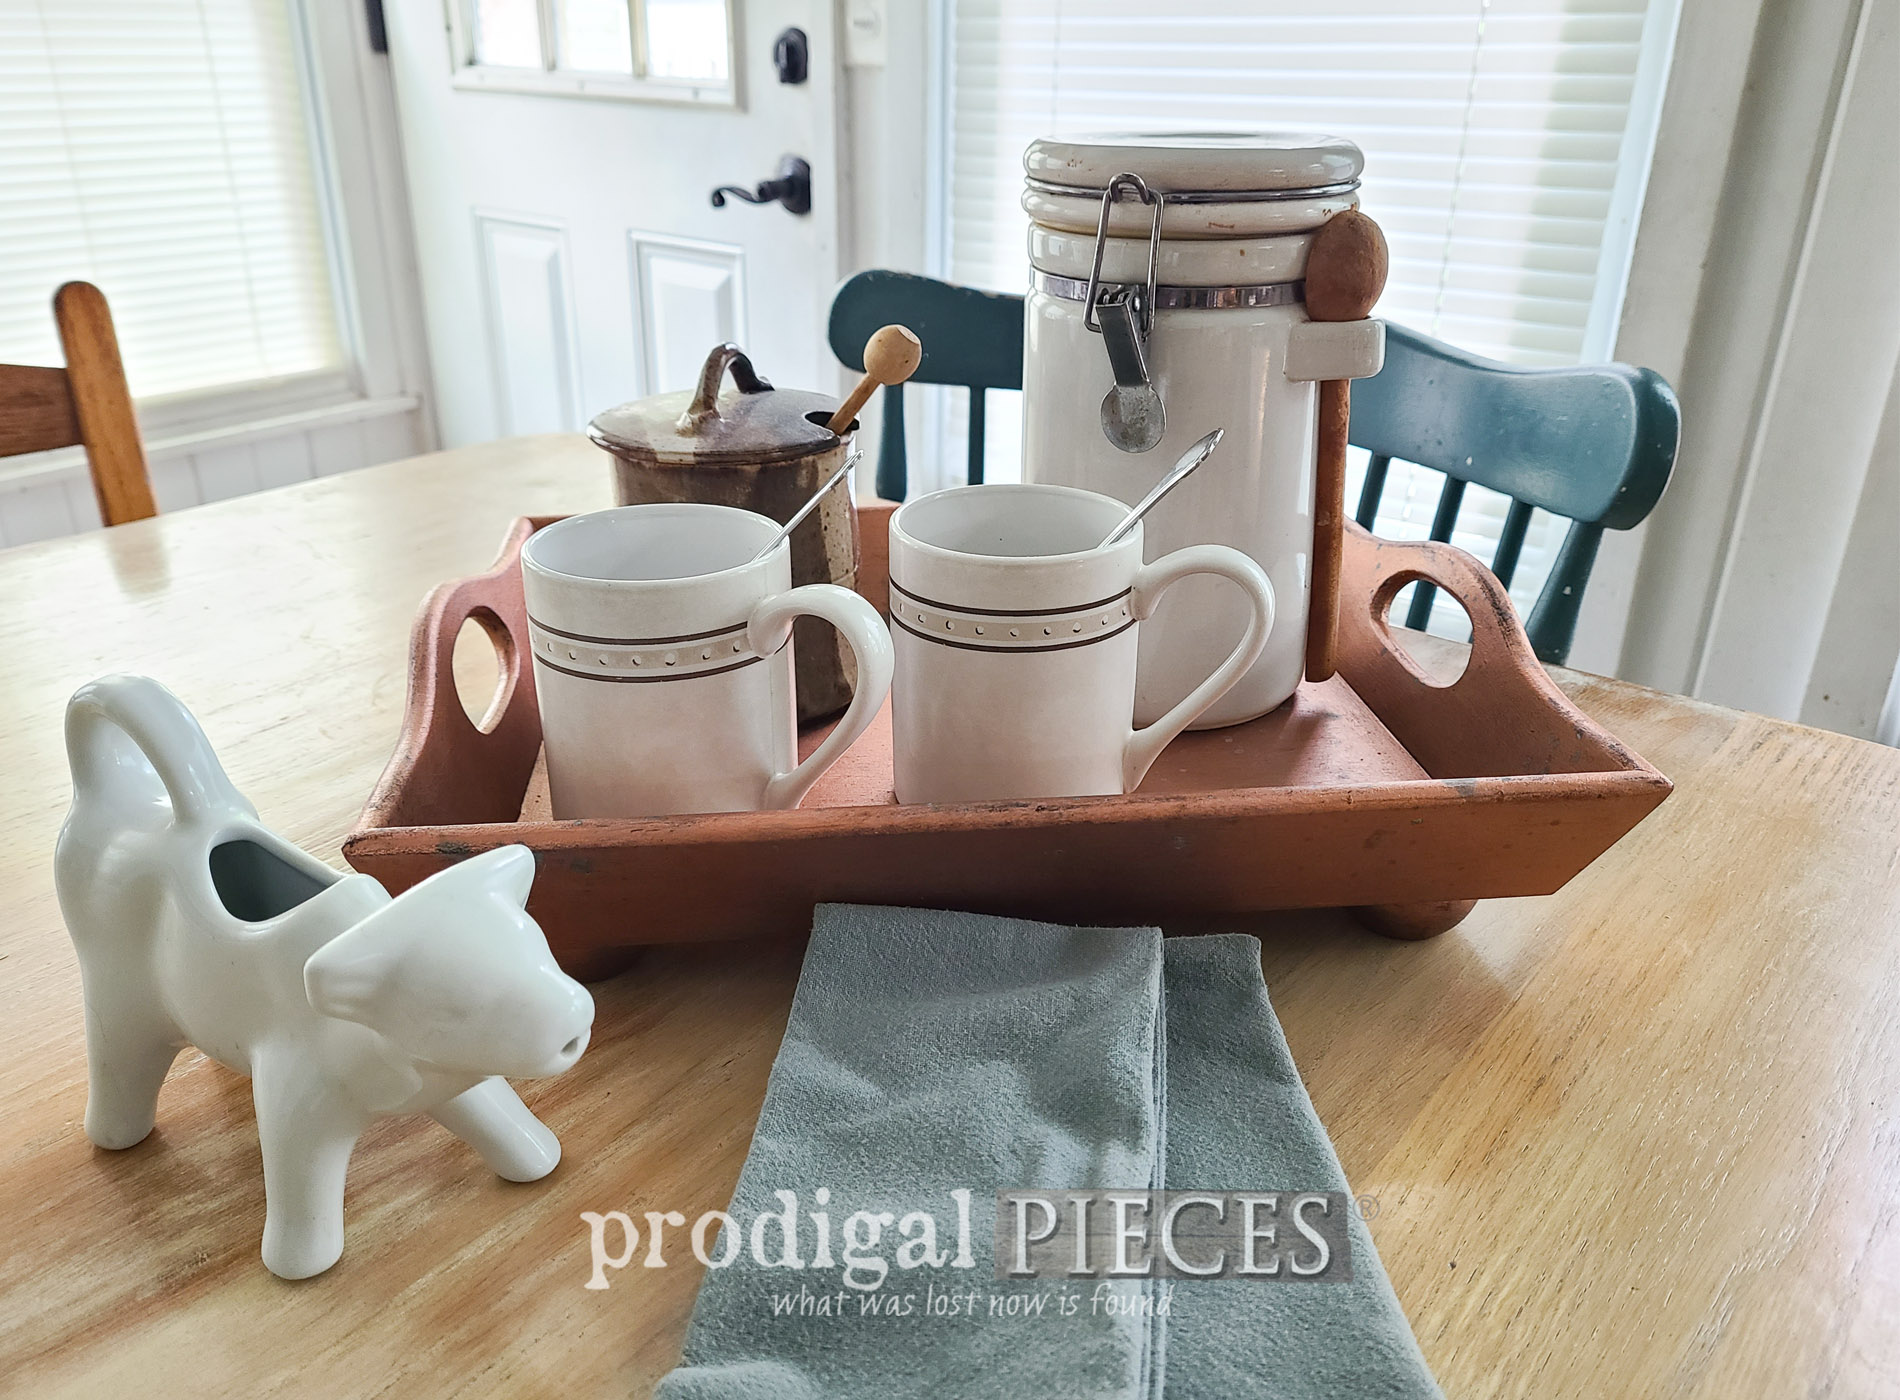 Featued Farmhouse Bowl & Tray Makeover from Thrifted Finds by Larissa of Prodigal Pieces | prodigalpieces.com #prodigalpieces